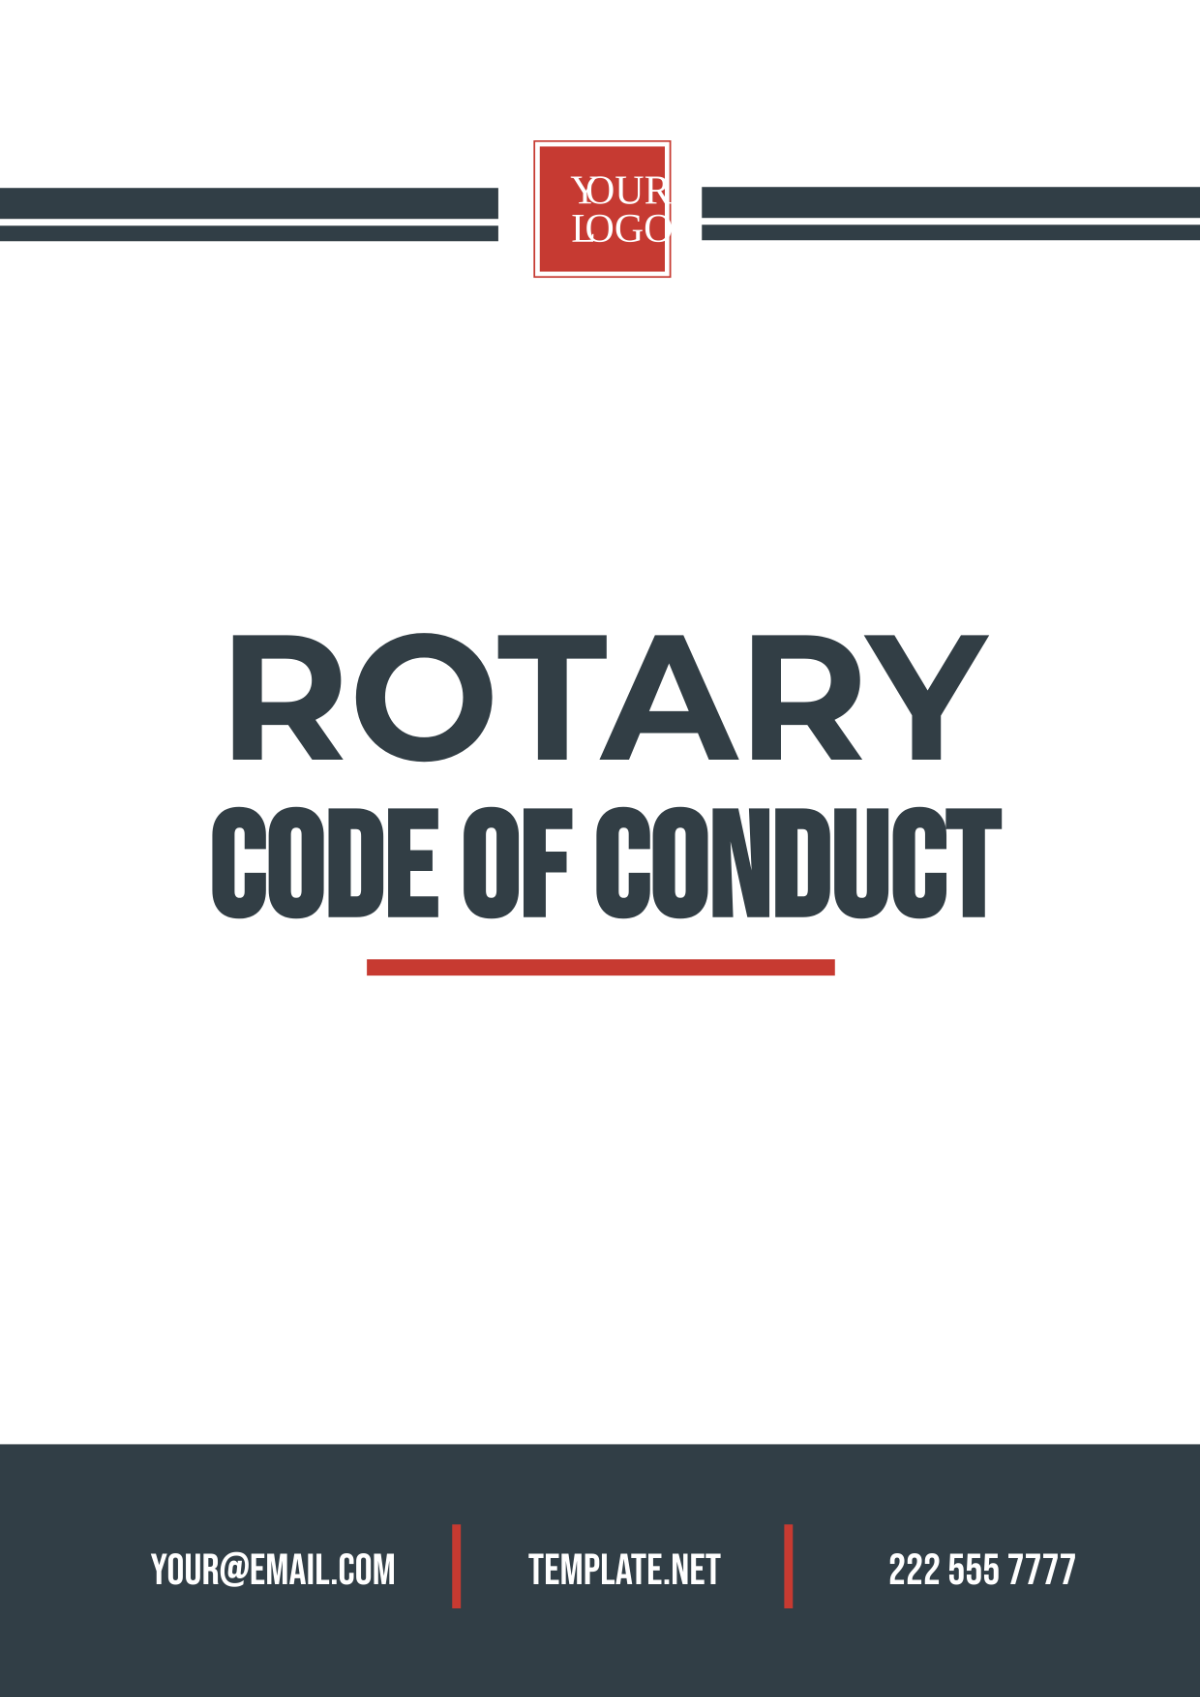 Rotary Code of Conduct Template